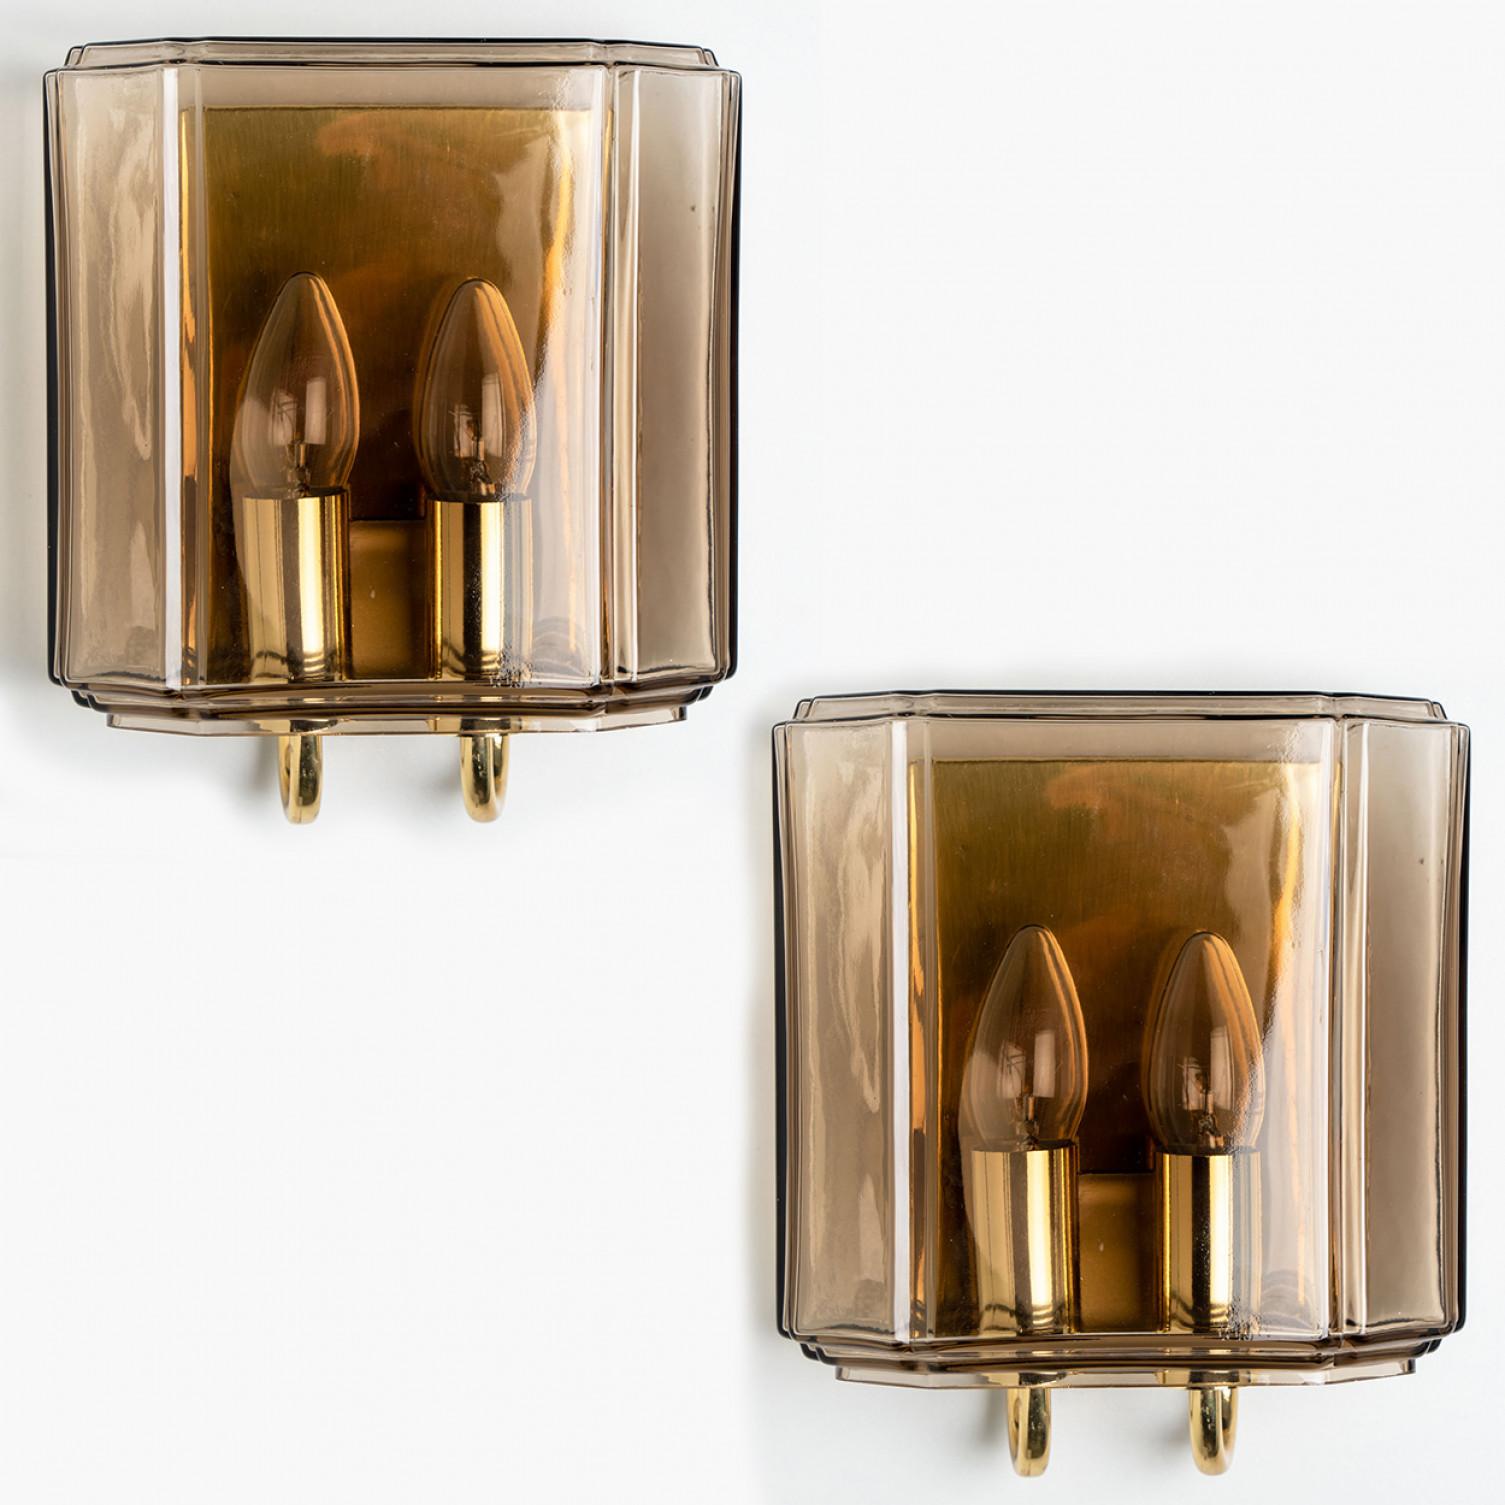 This beautiful pair of hand blown glass wall lights were manufactured by Glashütte Limburg in Germany during the 1960s (late 1960s-early 1970s). Beautiful craftsmanship. These mid century vintage lights feature handmade, elaborate smoked glass with